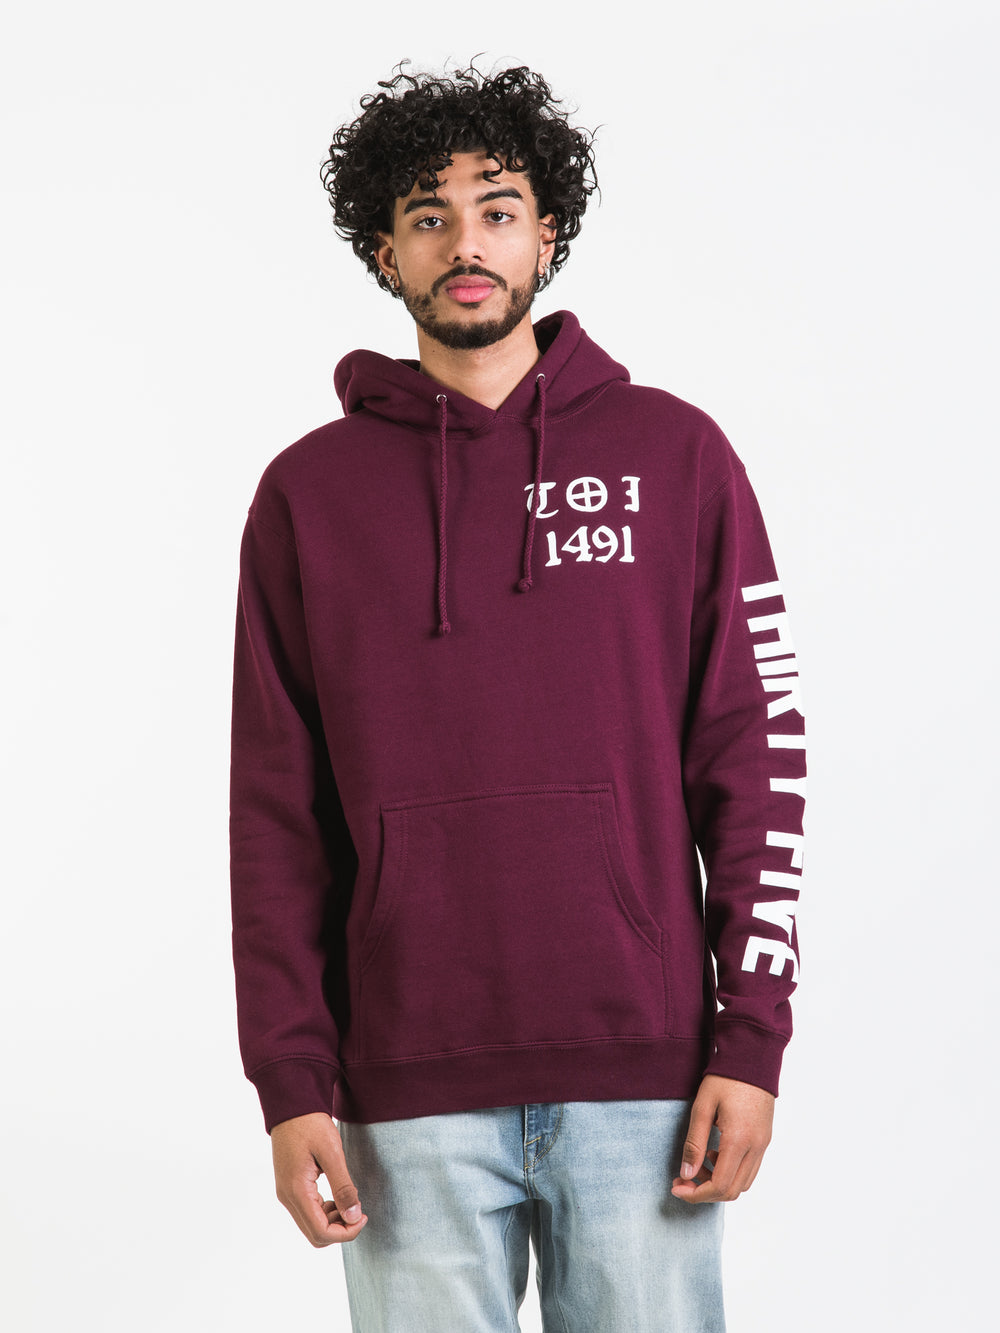 SECTION 35 TILTE SHOT PULLOVER HOODIE  - CLEARANCE